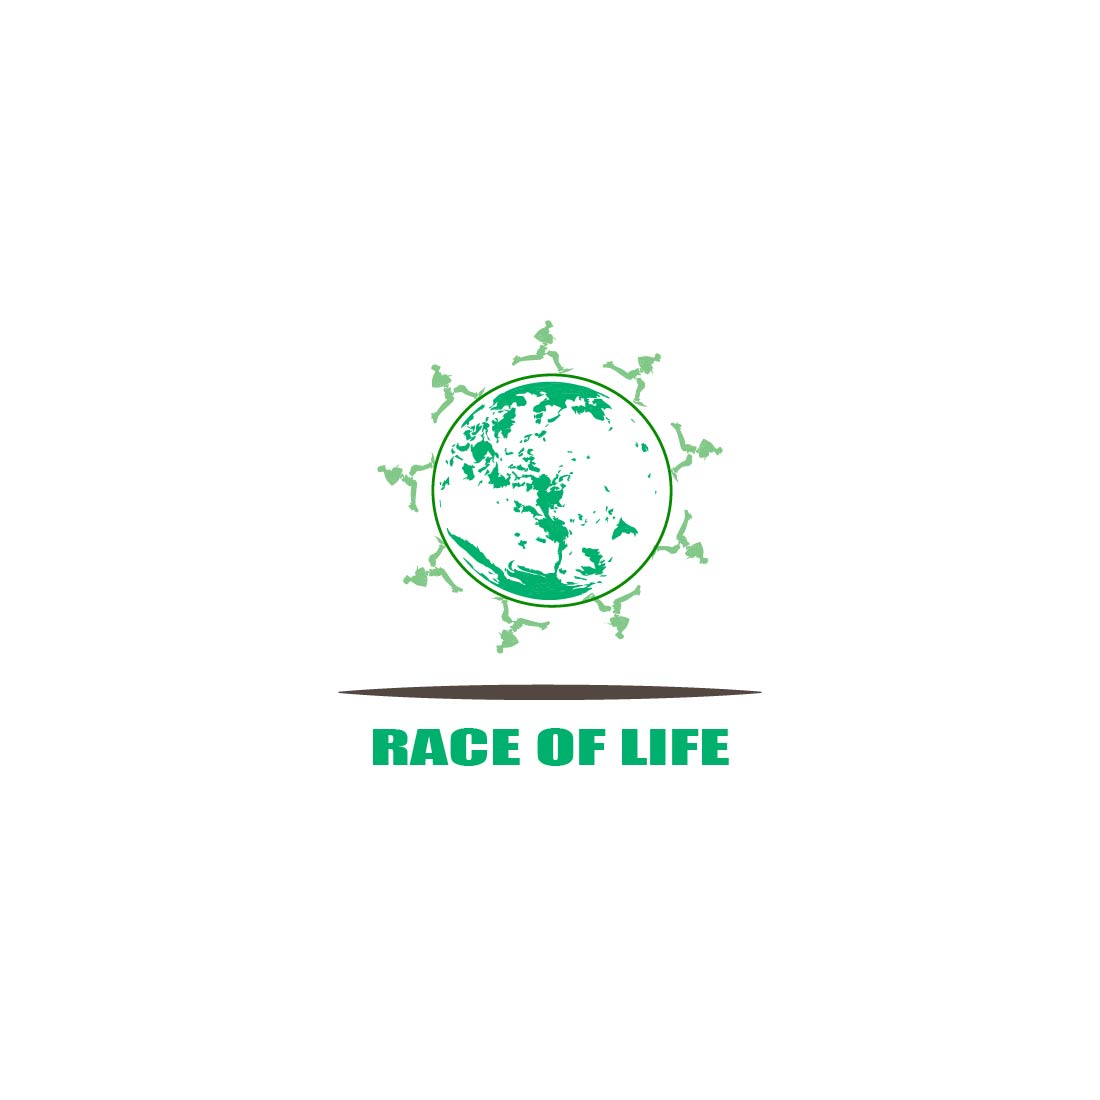 RACE OF LIFE cover image.